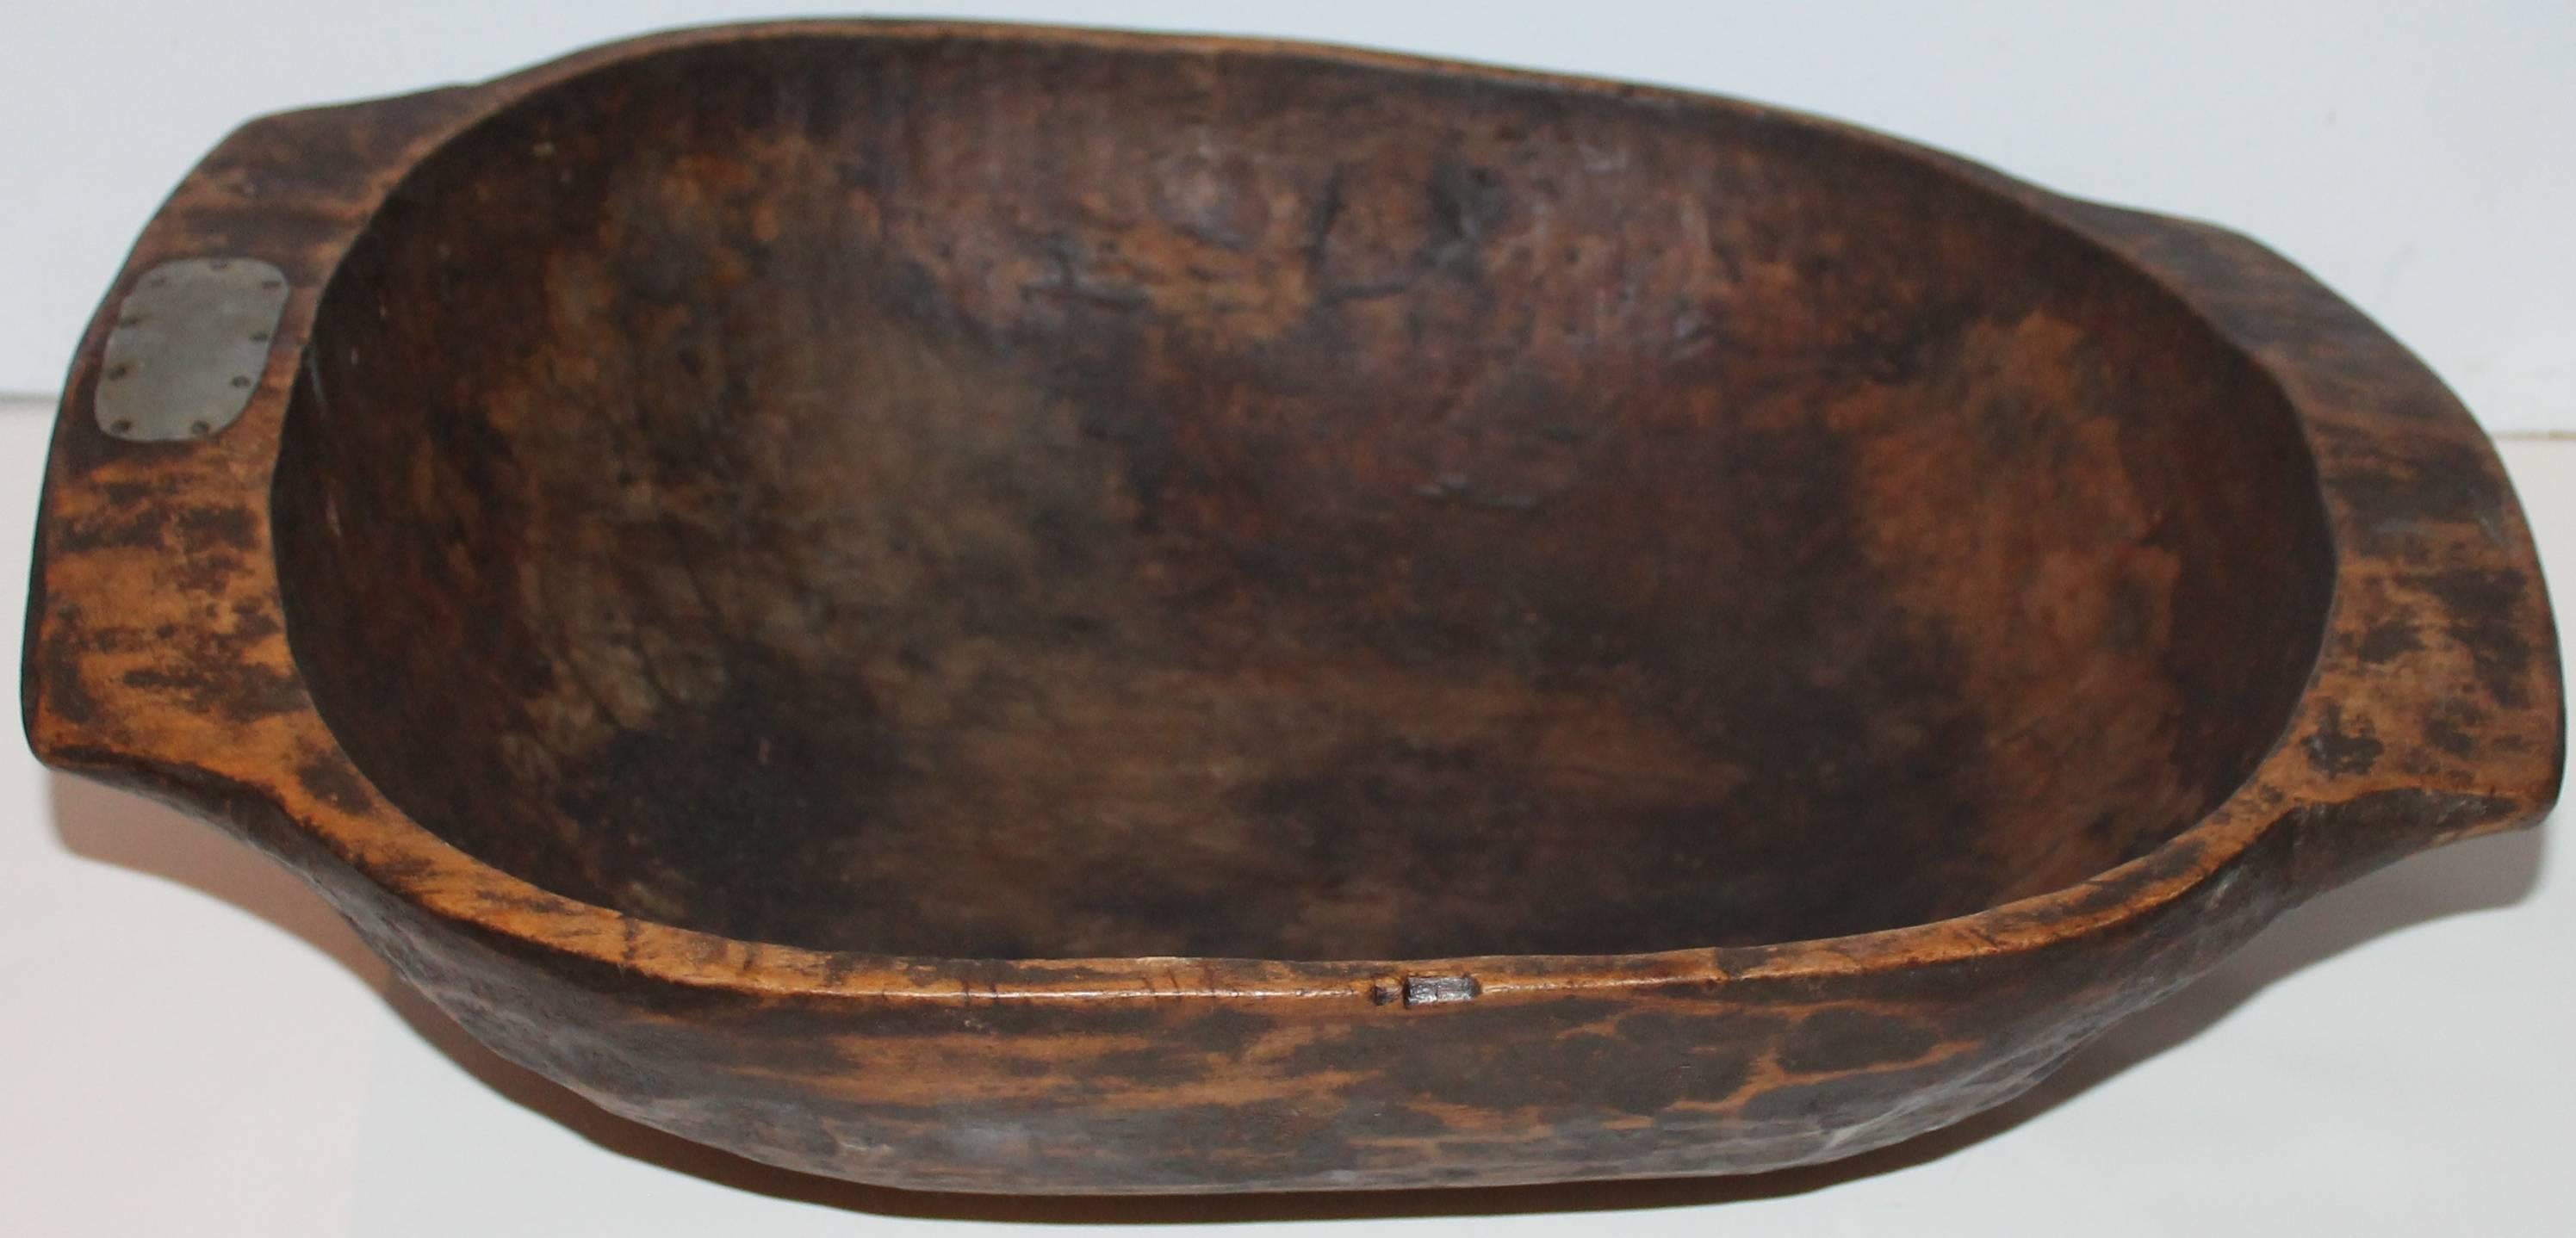 This wonderful hand-carved dough bowl or trencher is in great condition with a wonderful old surface. The patina is the best and untouched. There are no cracks but a small little repair on the handle.